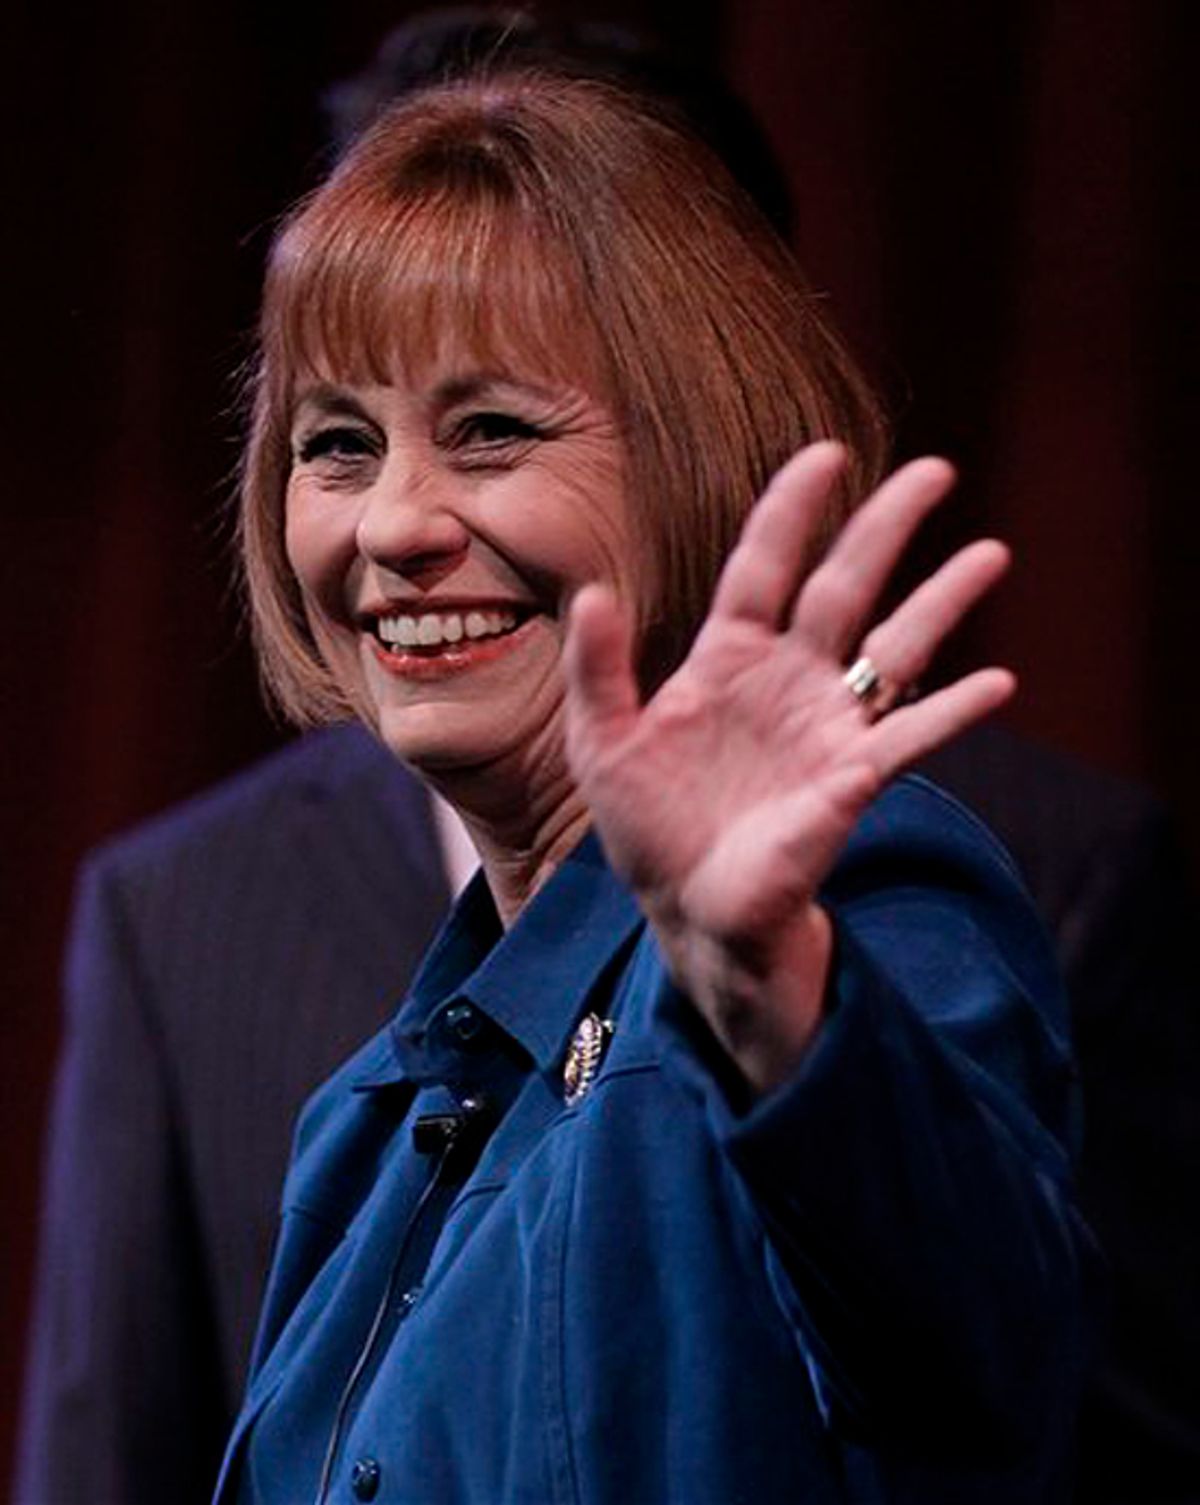 FILE - In this Sept. 23, 2010 file photo, Nevada Republican Senate candidate Senate Sharron Angle acknowledges supporters as she walks on stage for a candidate forum, at Faith Lutheran High School in Las Vegas. (AP Photo/Julie Jacobson, File) (Julie Jacobson)